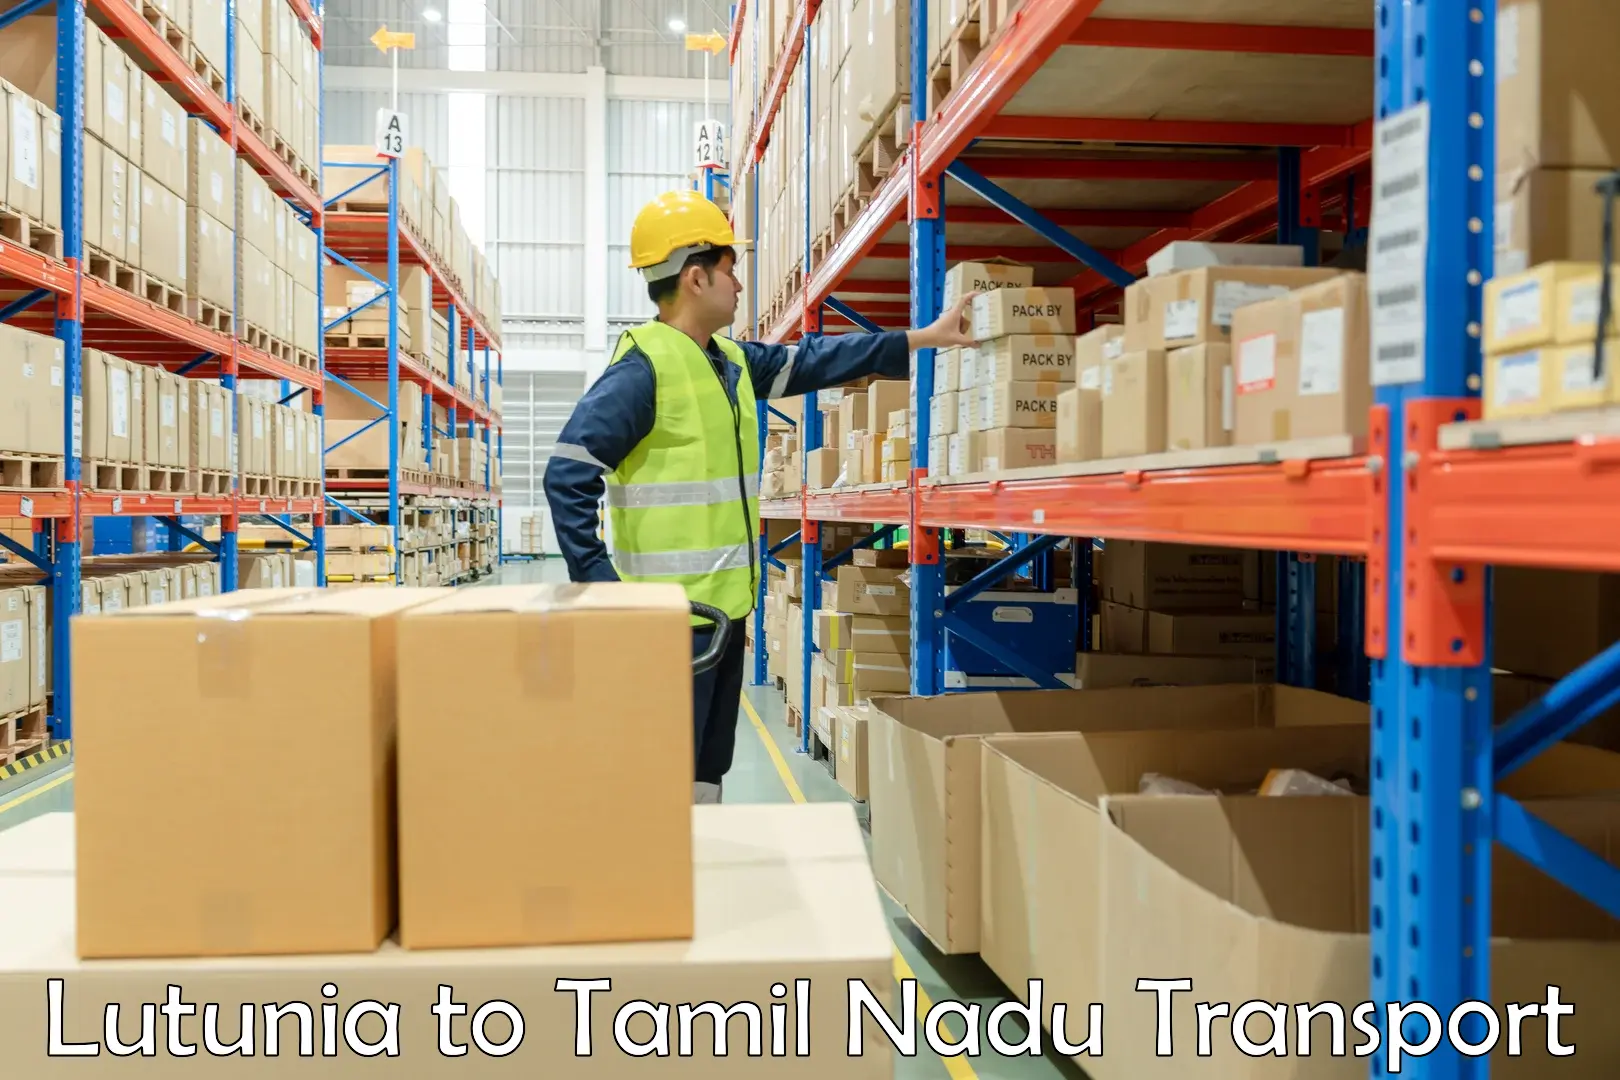 Container transport service Lutunia to Tamil Nadu